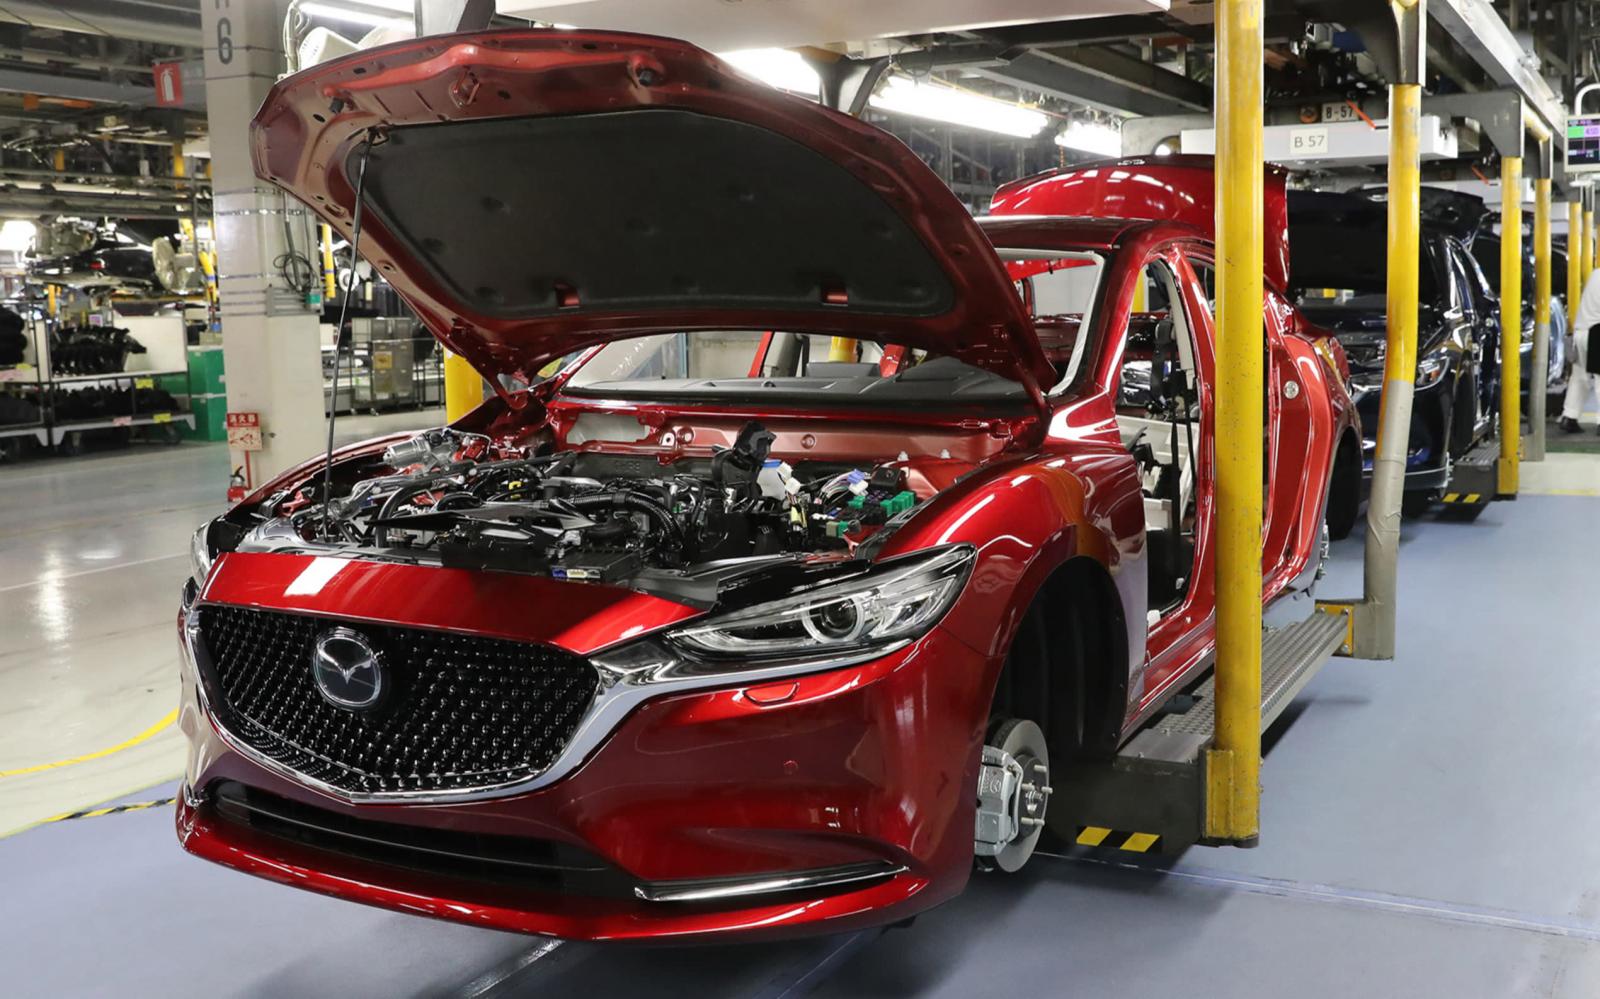 Mazda looking to expand lineup with more SUVs